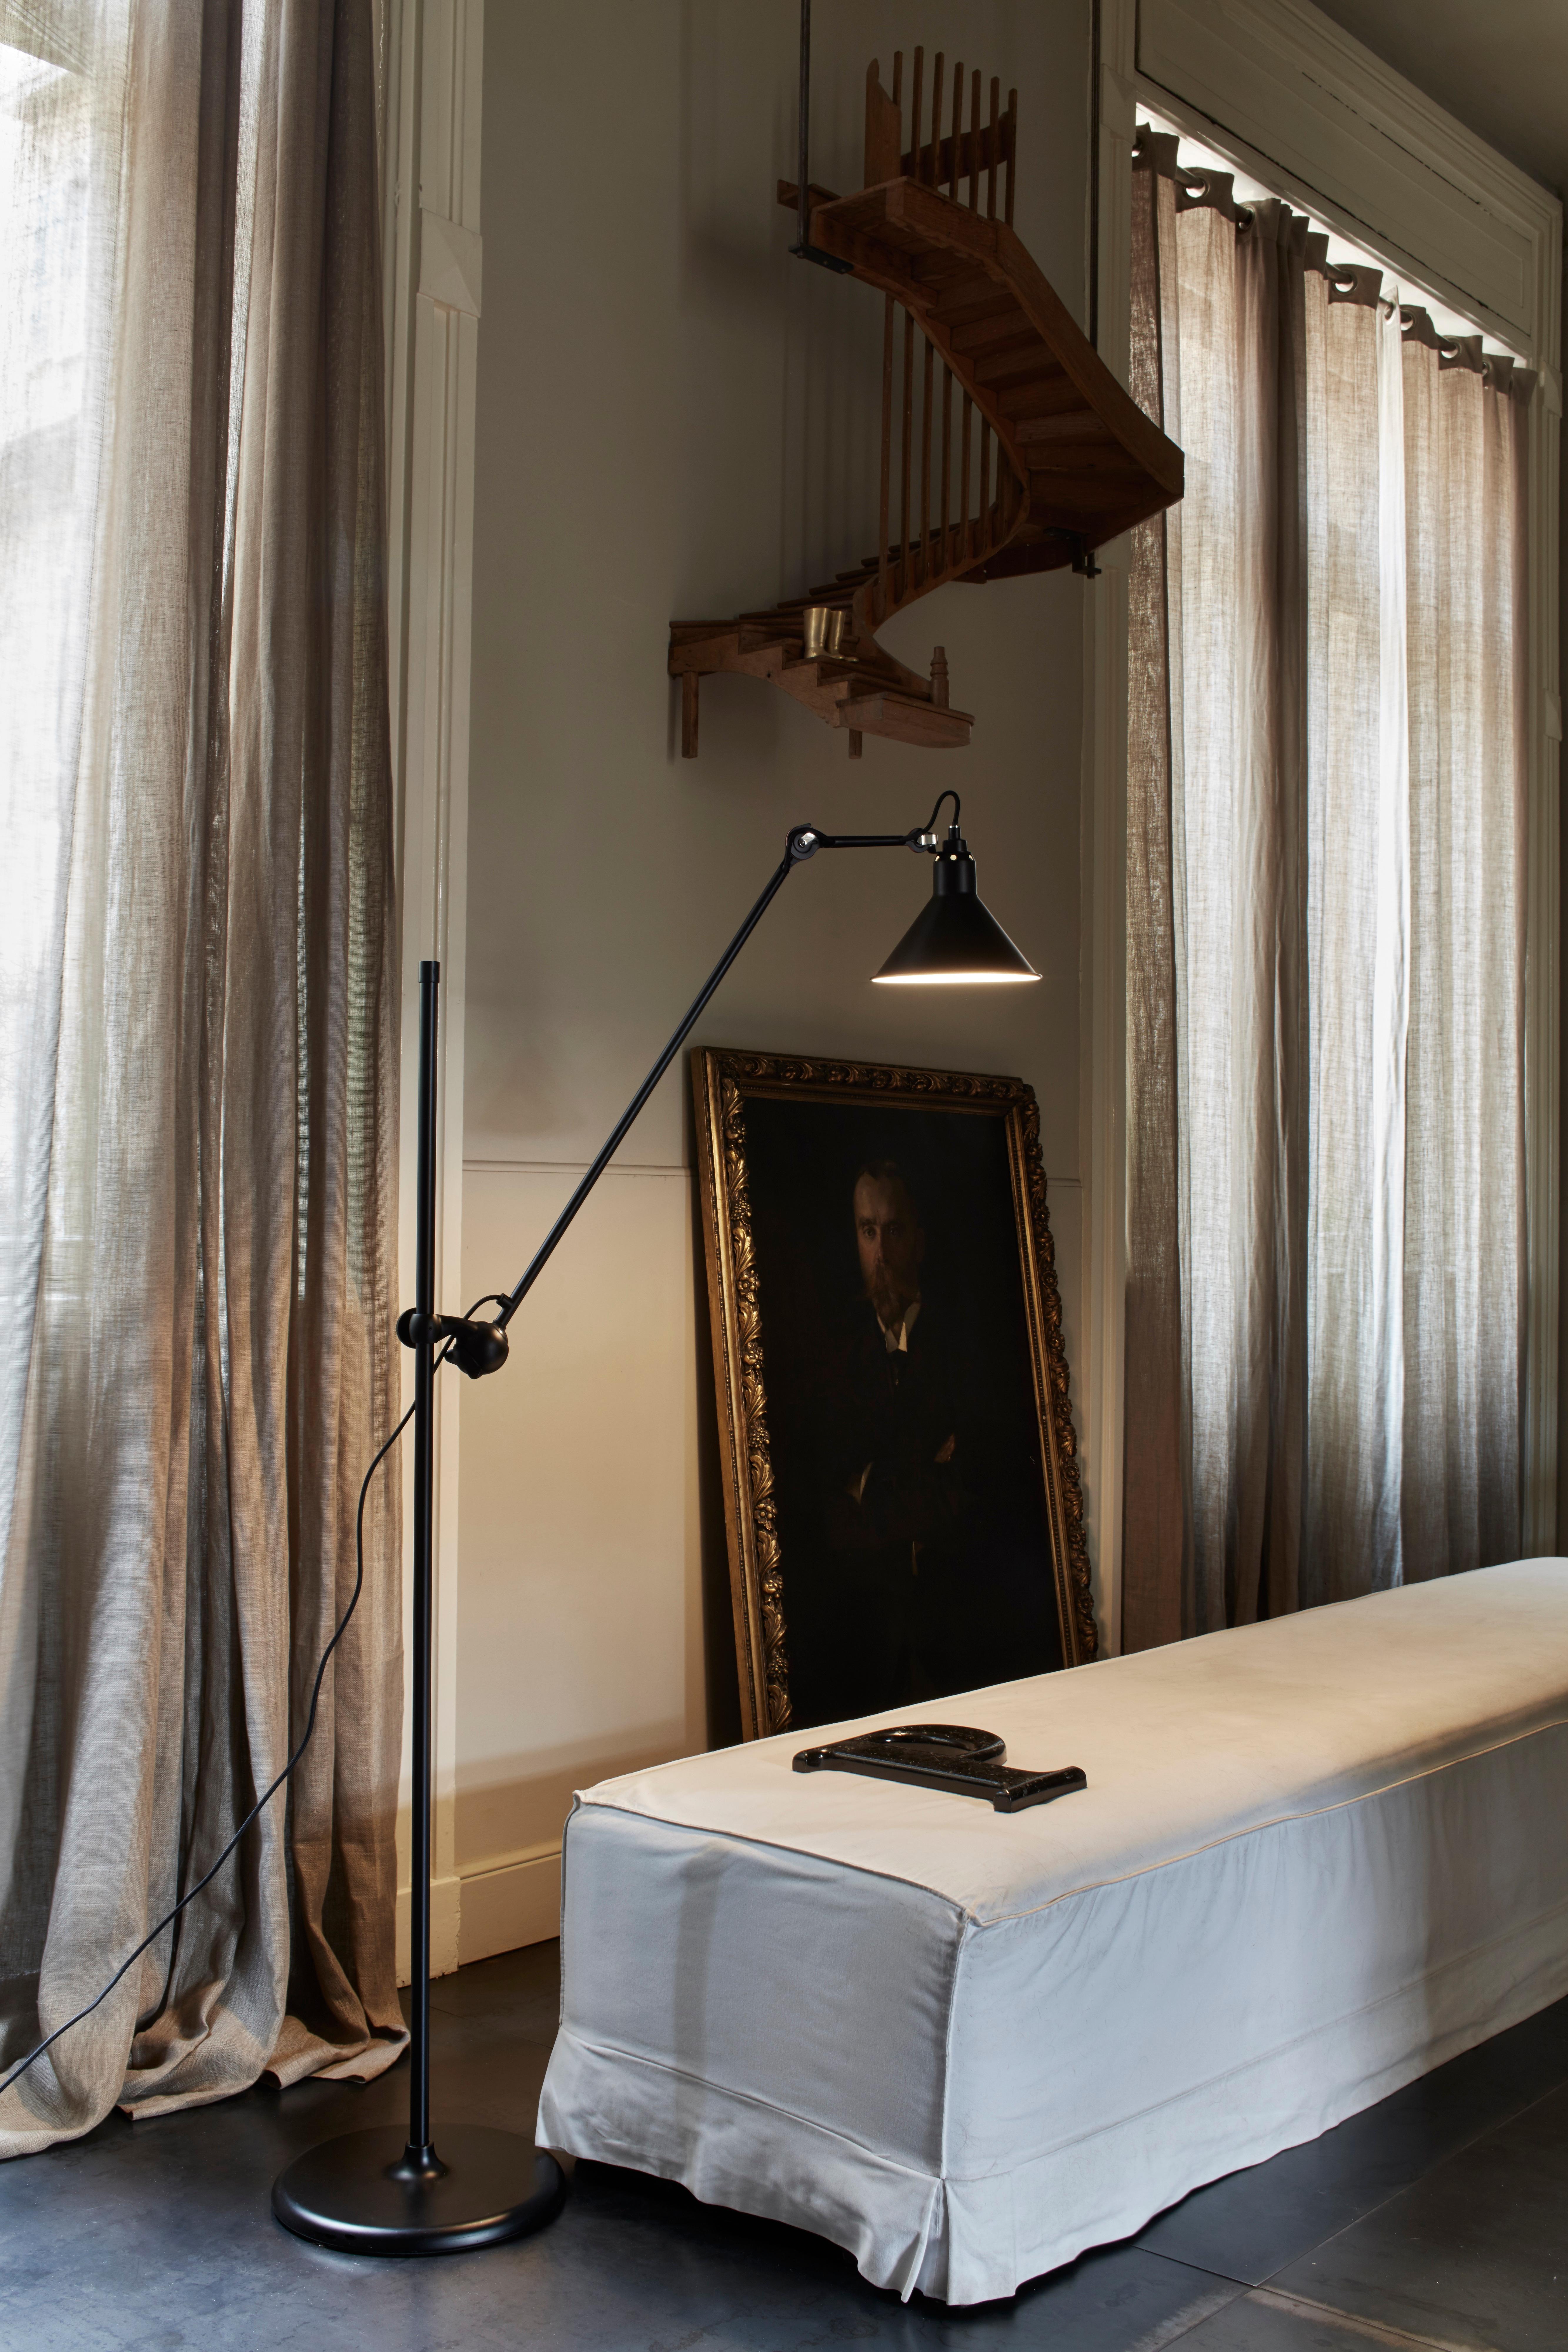 Steel DCW Editions La Lampe Gras N°215 Floor Lamp in Black Arm and Raw Copper Shade For Sale